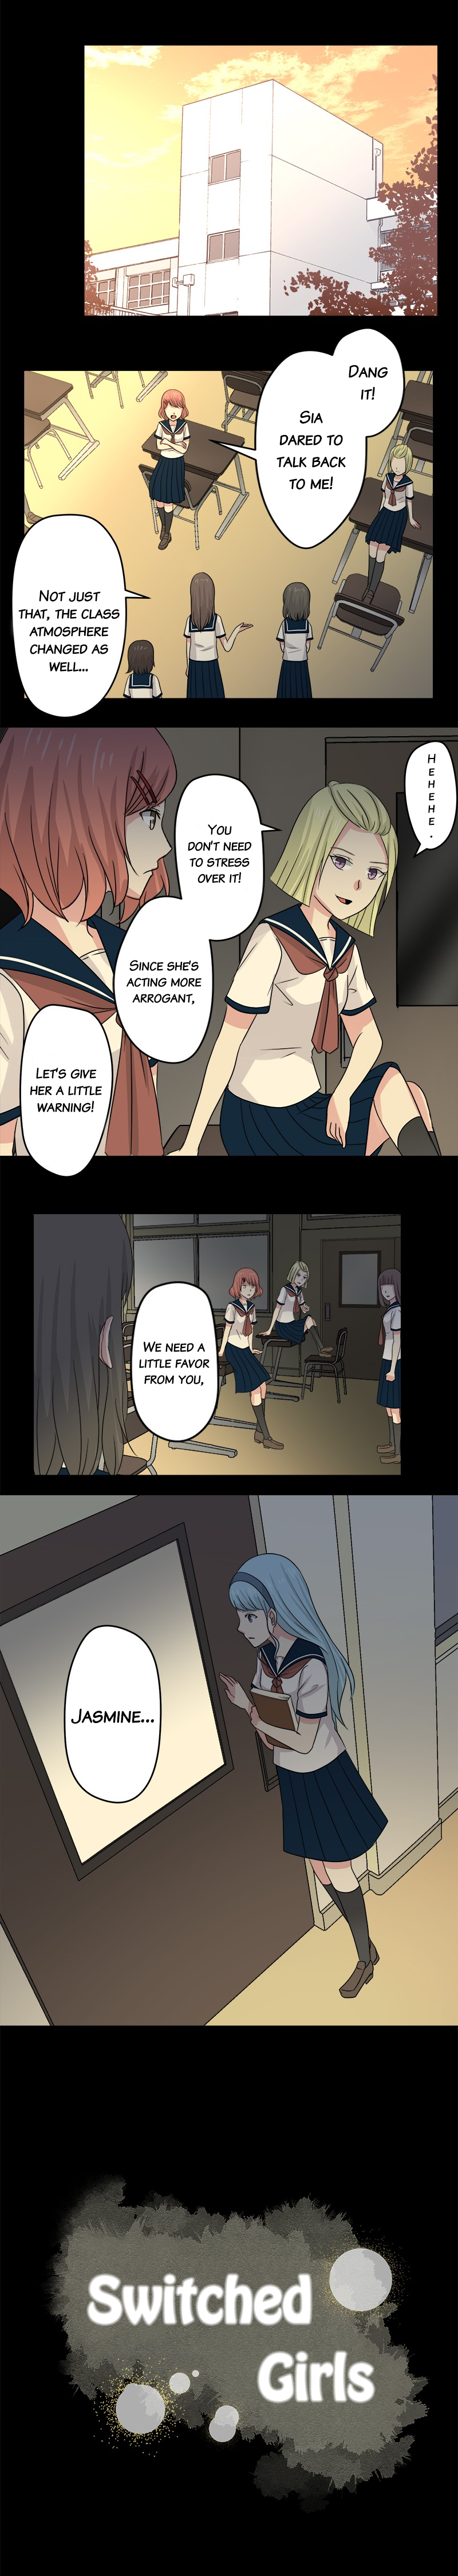 Switched Girls - Page 3